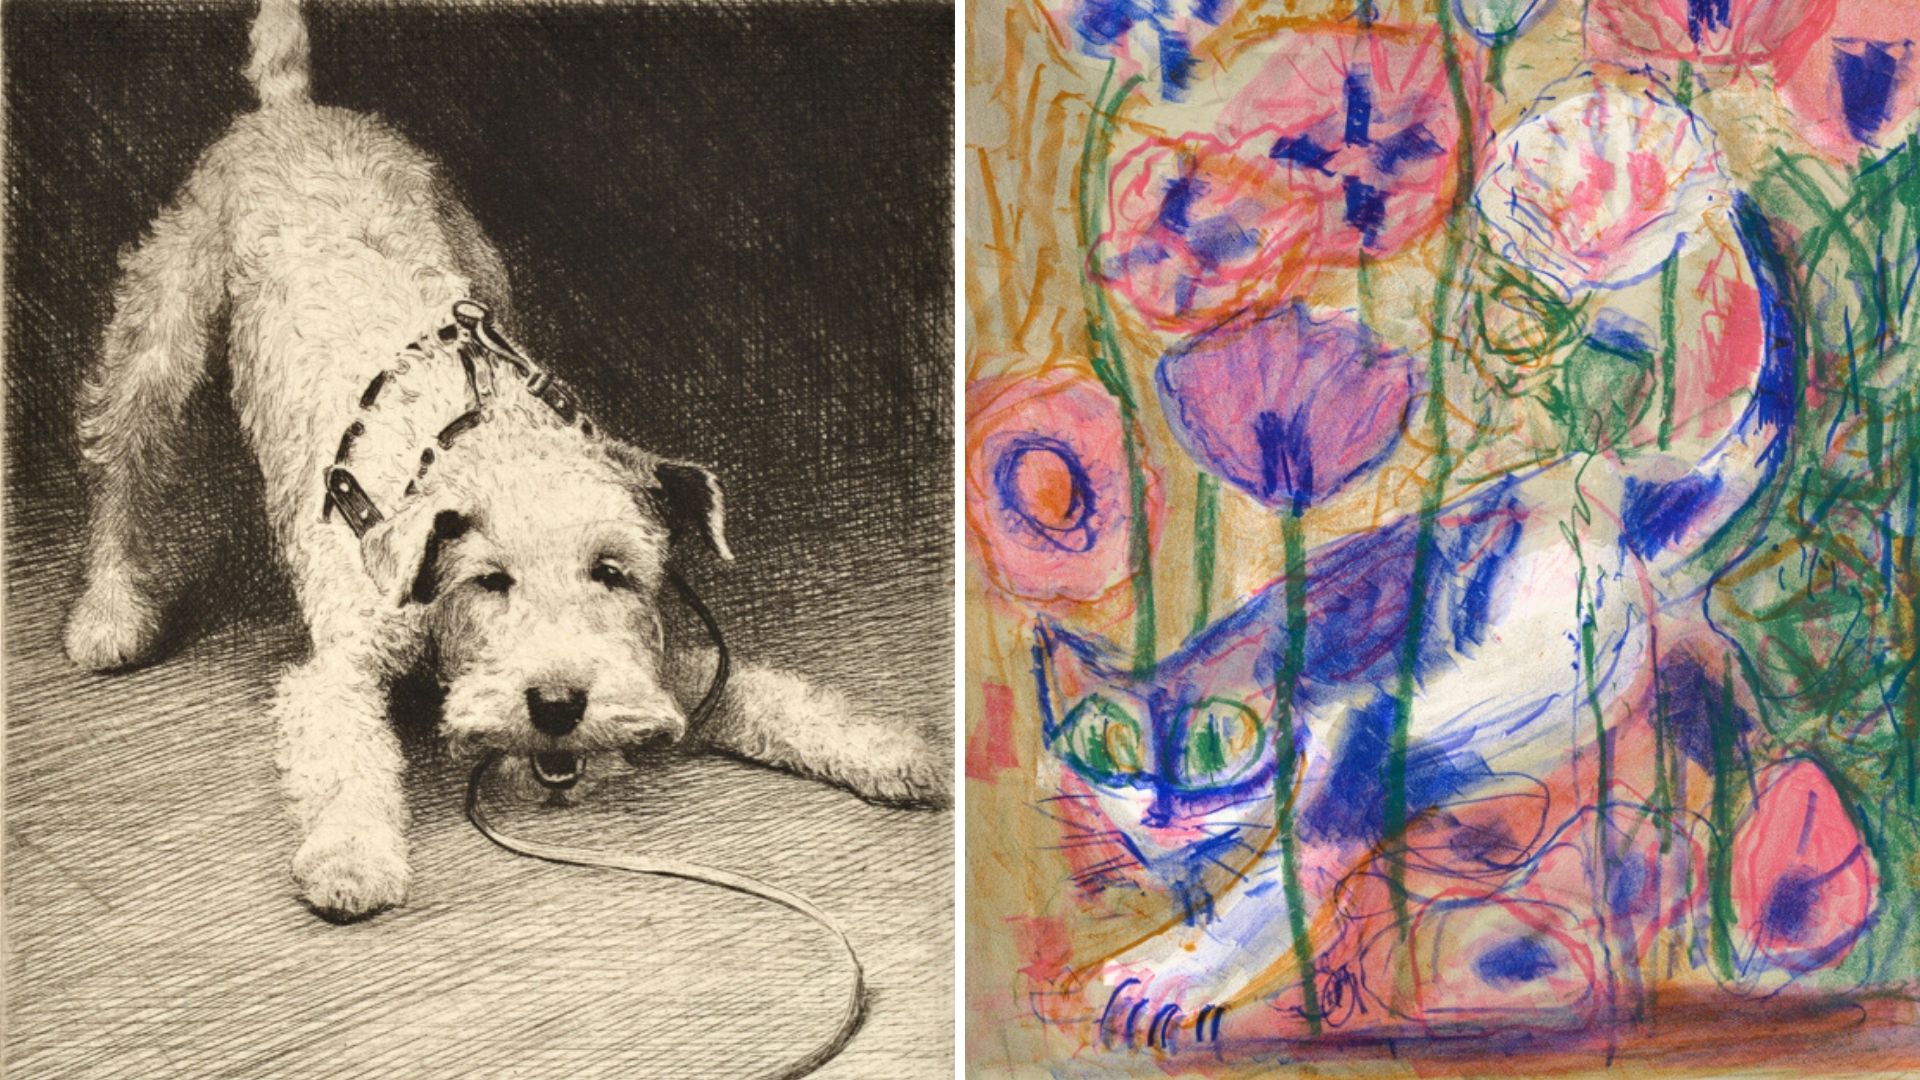 Two drawings; on the left a dog bowing on his front legs and on the right a cat walking amongst blue and pink flowers.